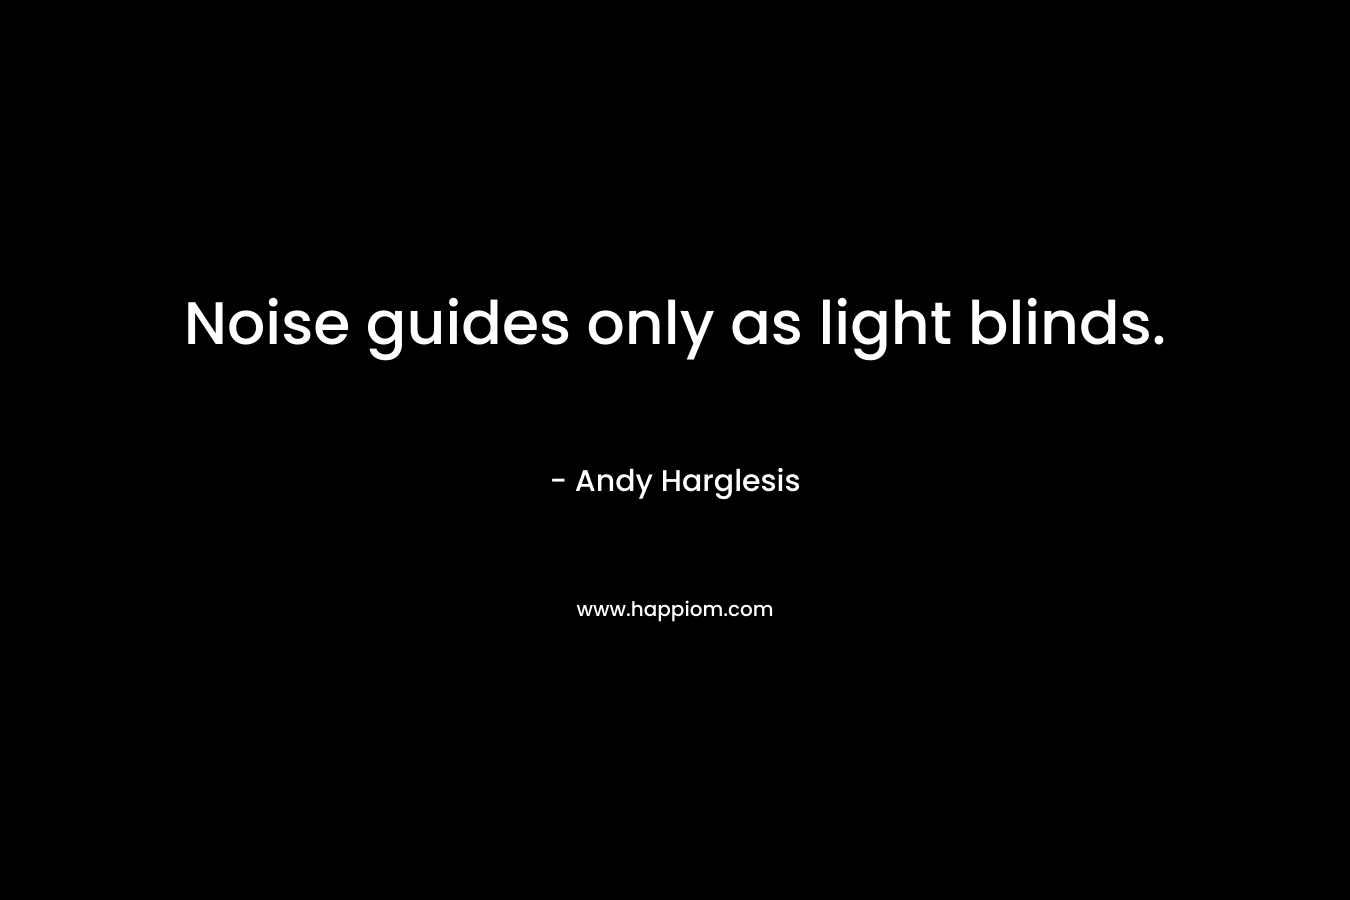 Noise guides only as light blinds. – Andy Harglesis